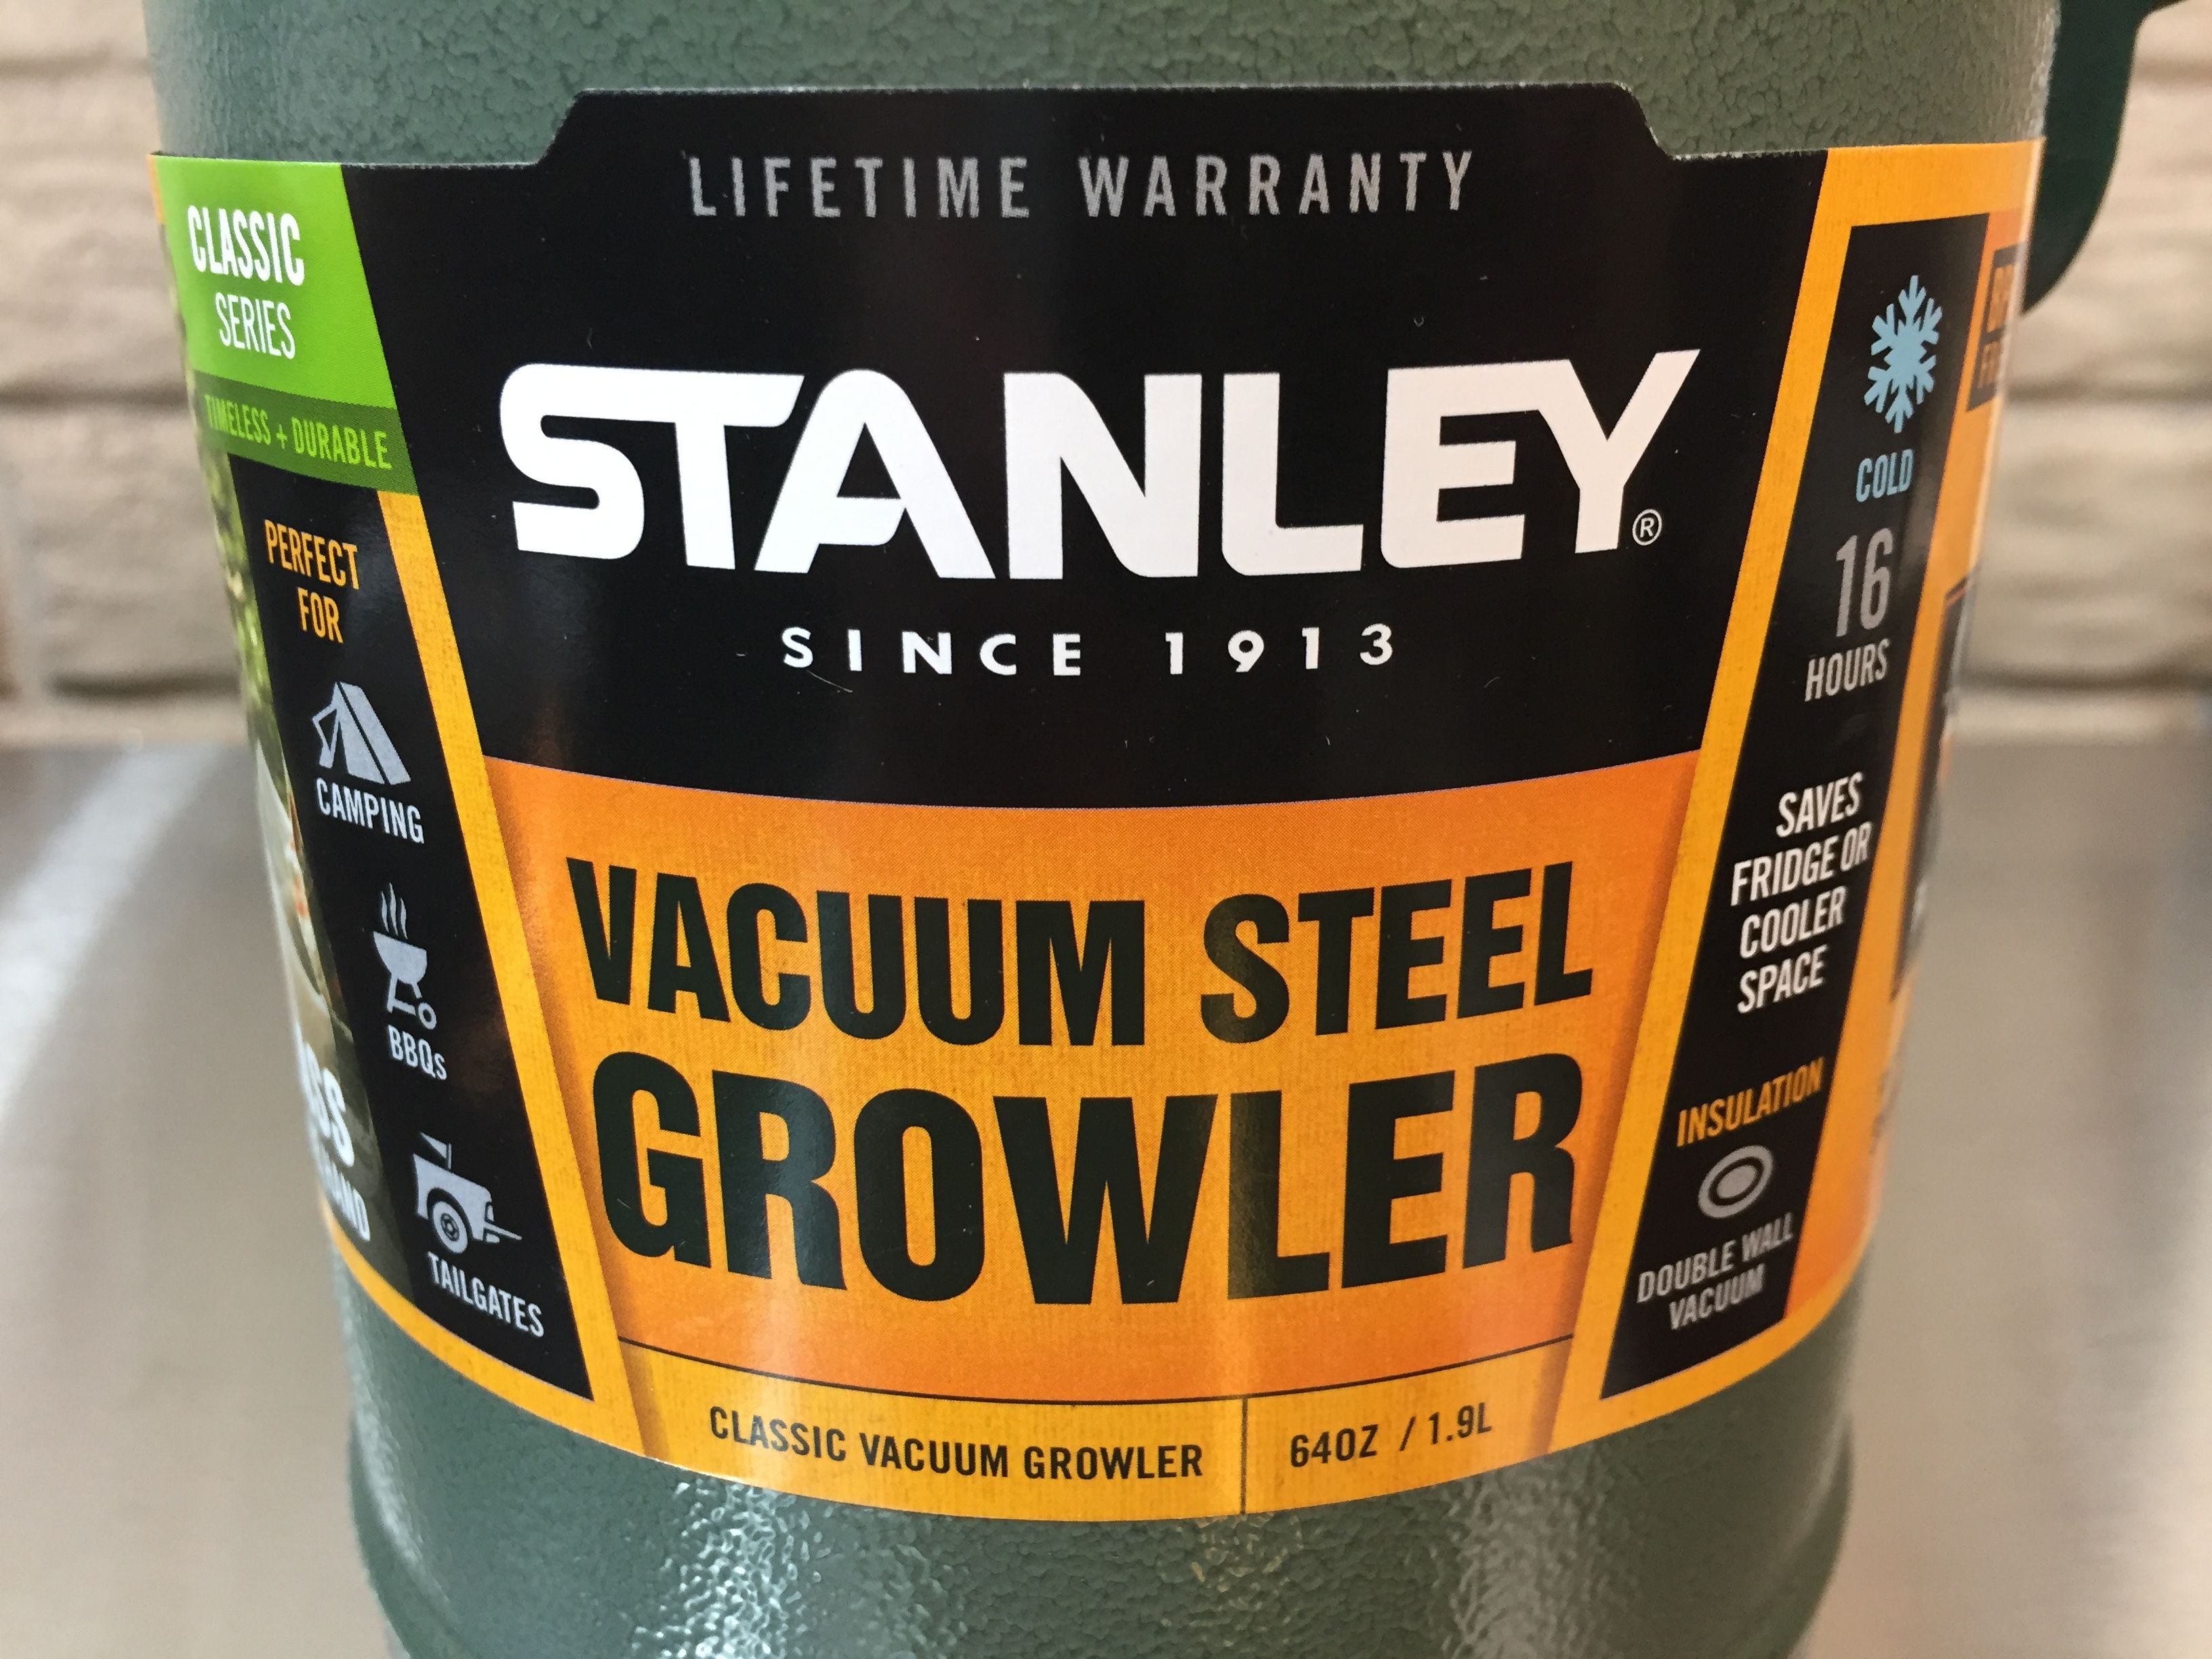 Hands On Review: Stanley Classic Vacuum Insulated Growler! – Includes  Temperature Trials